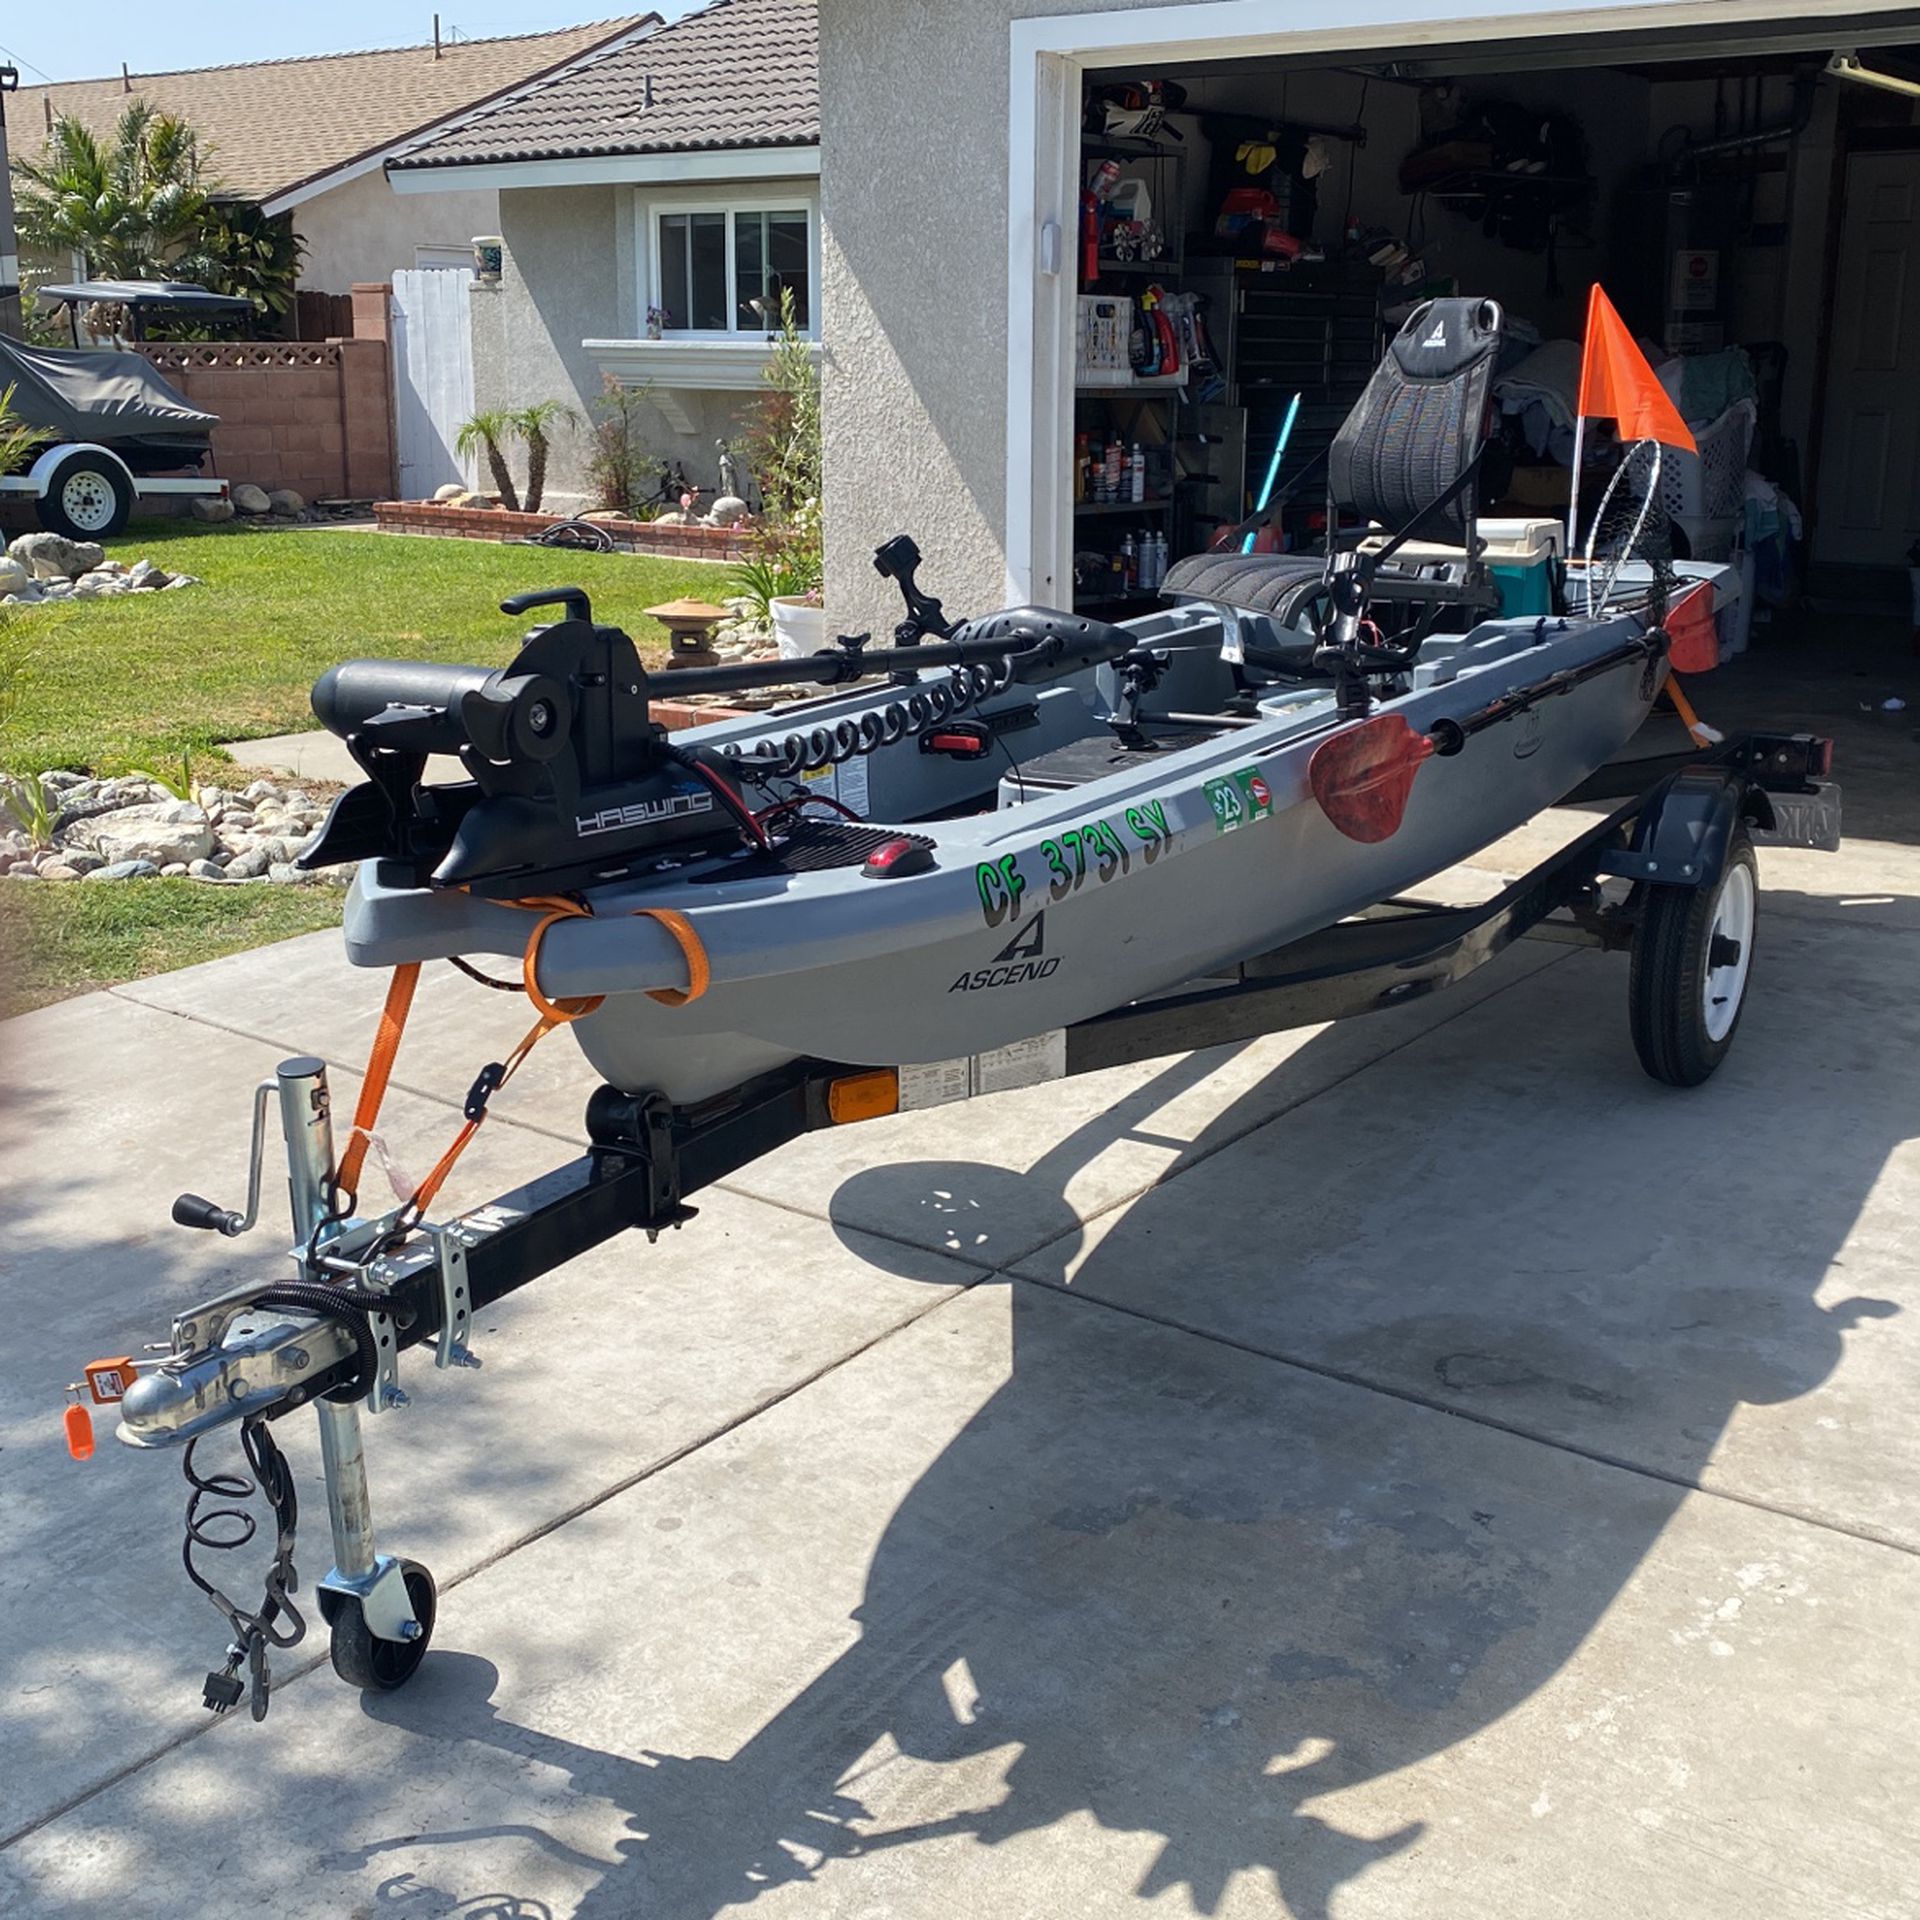 Assend 133x kayak with trailer